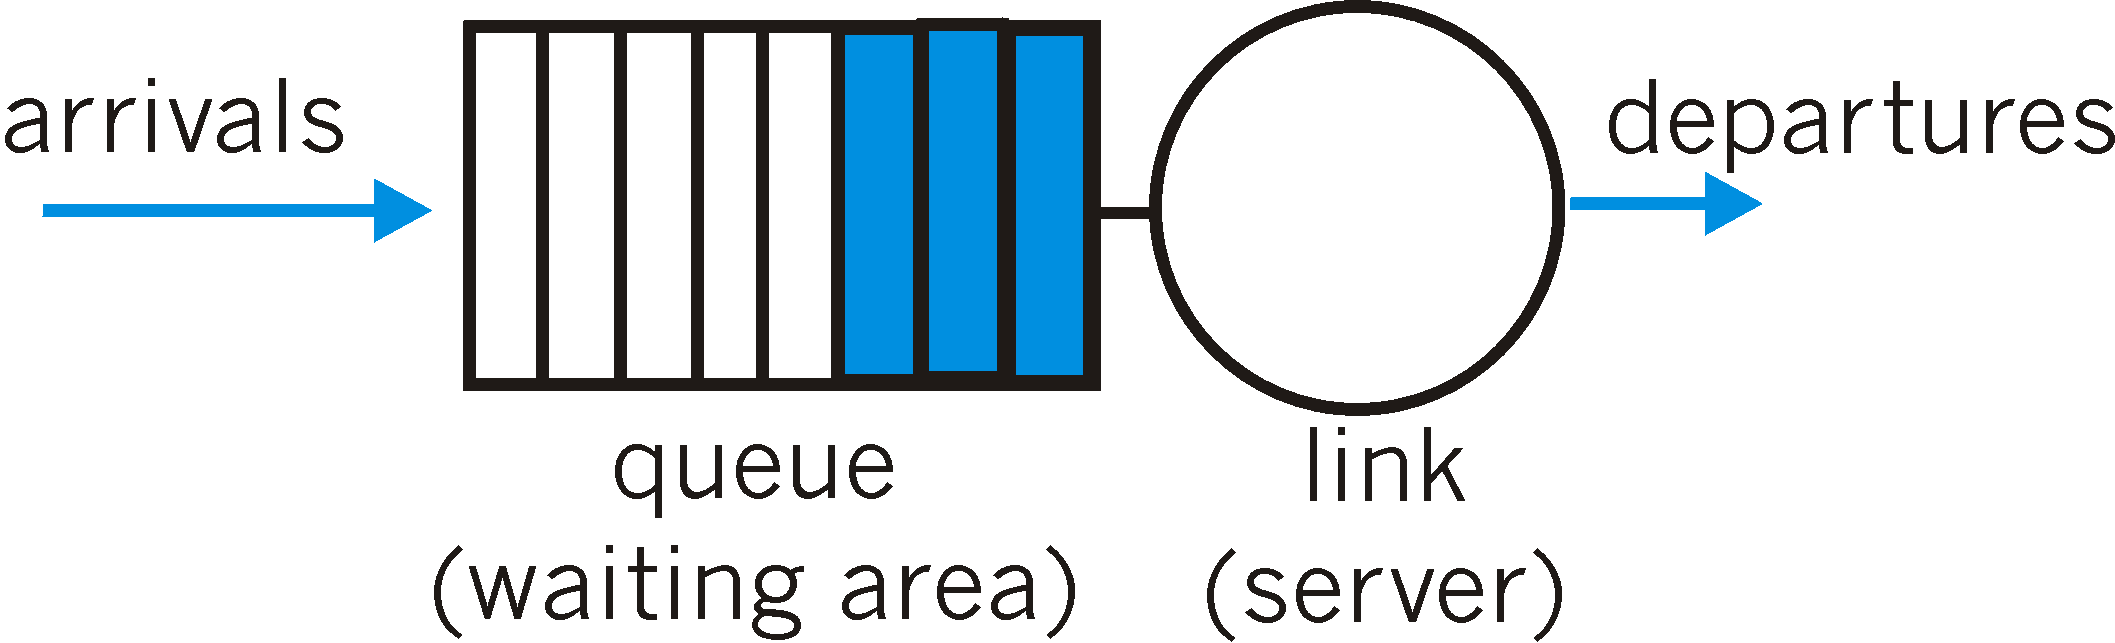 Quality of Service (QoS) Queues and Queuing Explained - Study CCNA